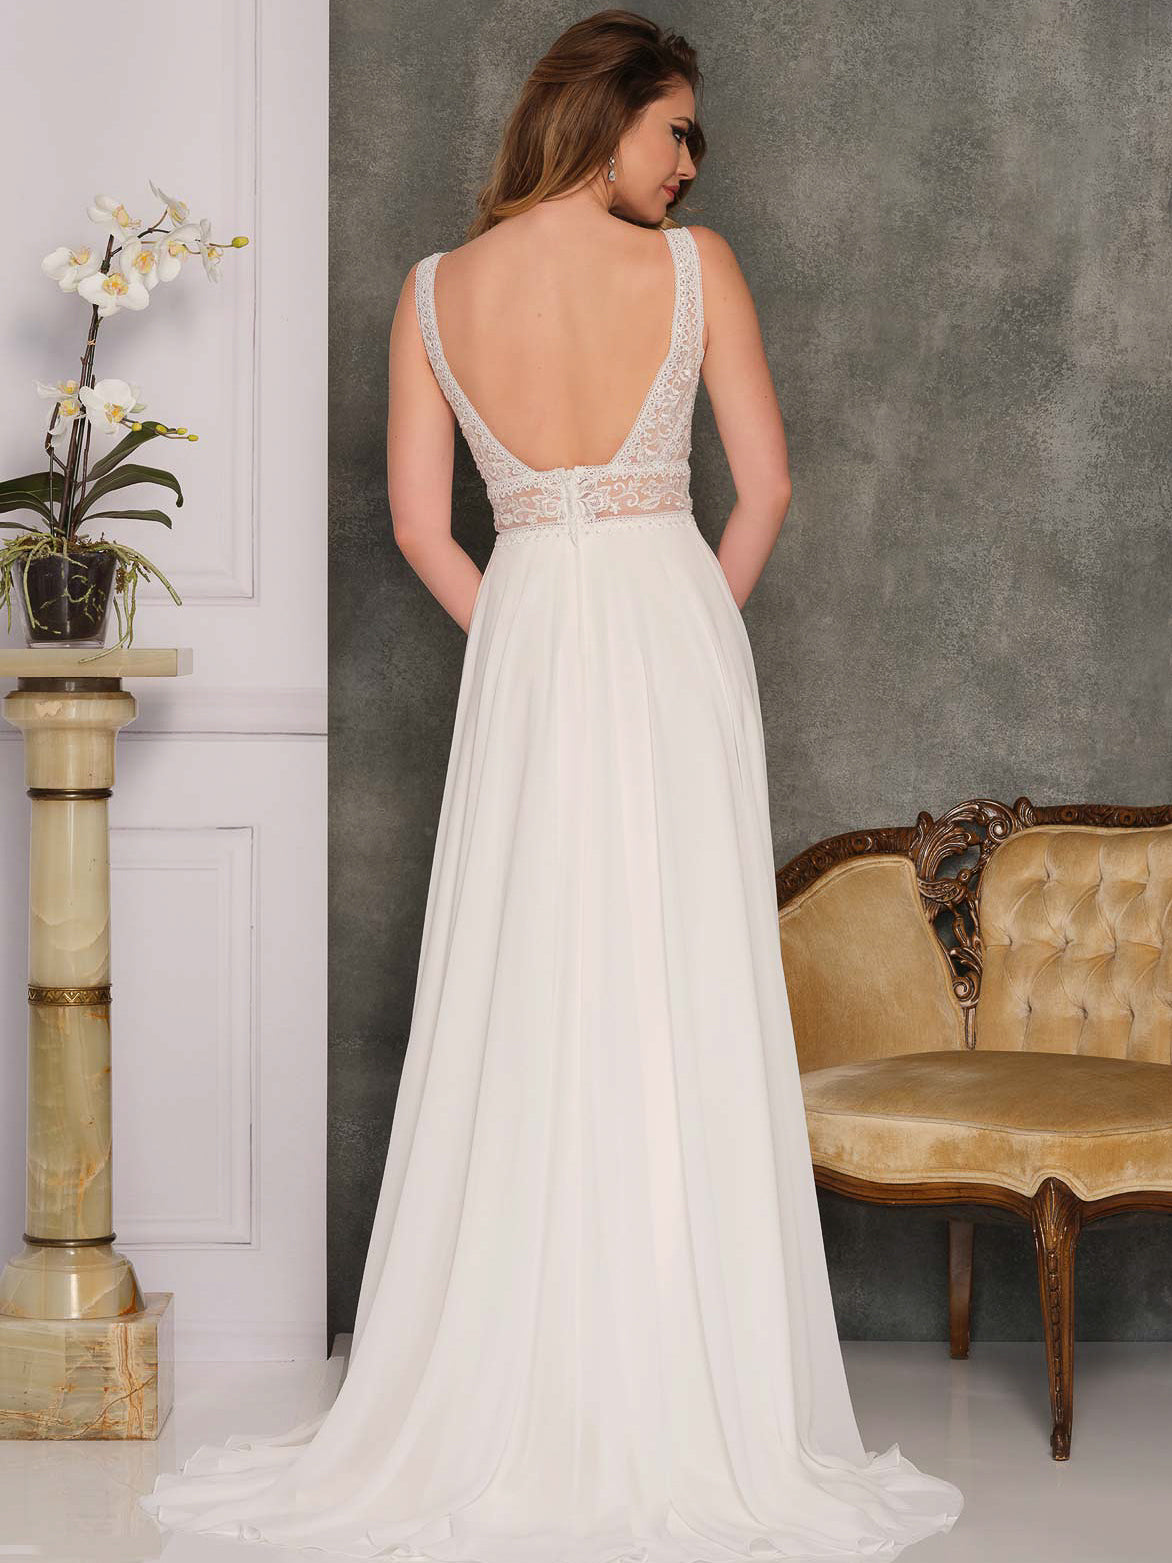 THICK TRIM SCOOP BACK WEDDING GOWN